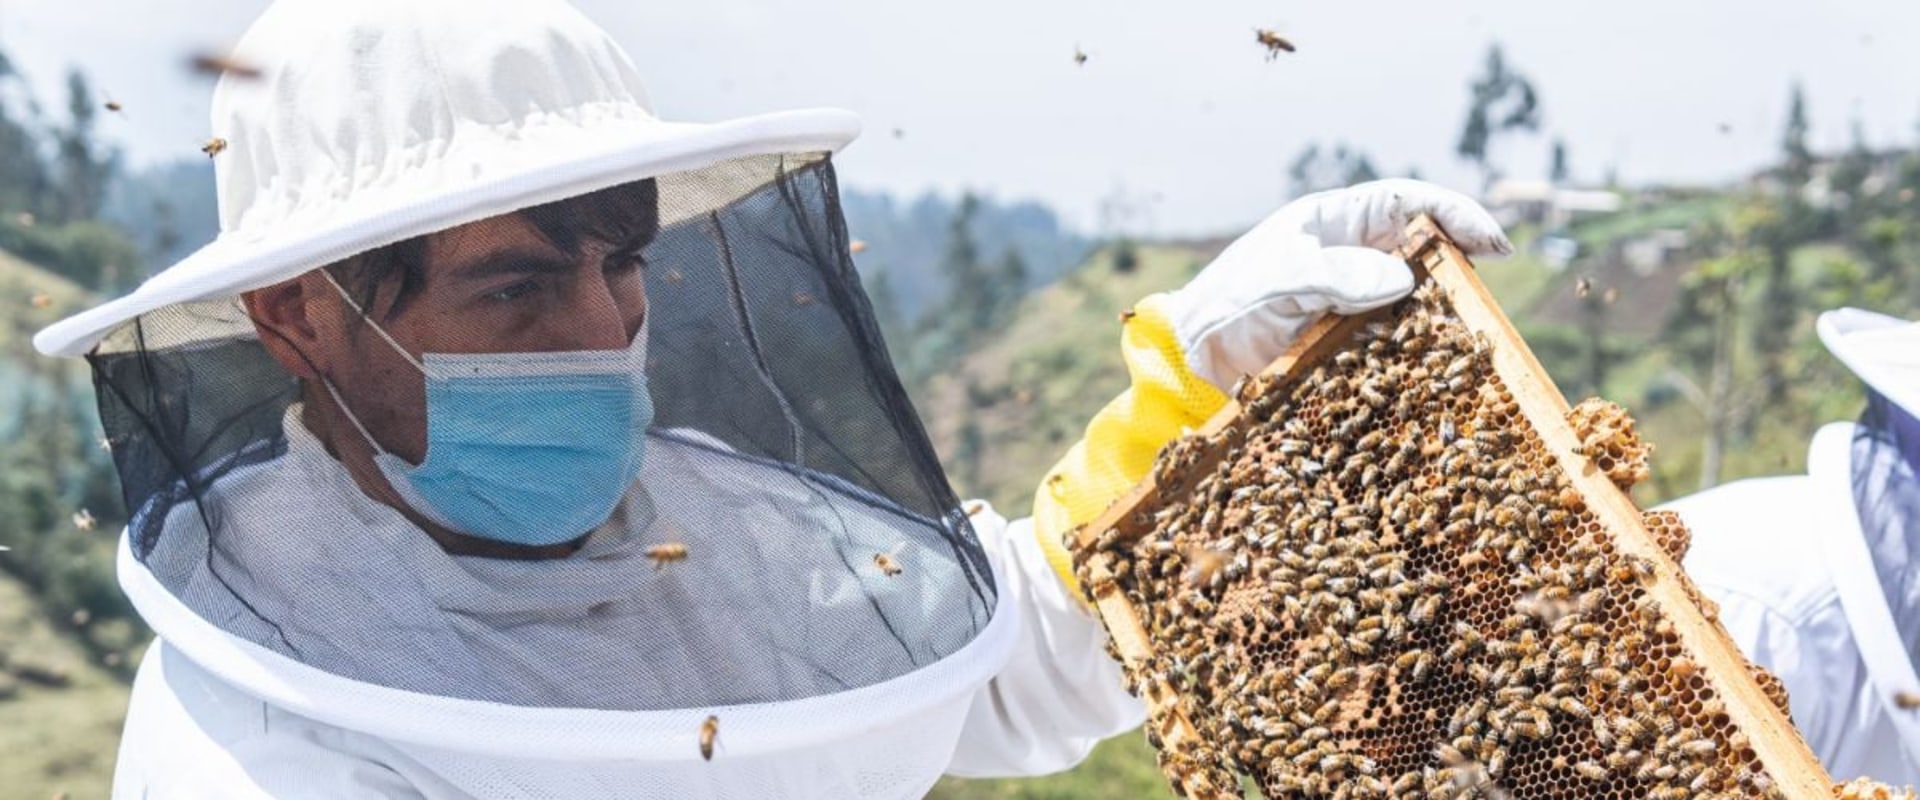 Which state has the most apiaries?